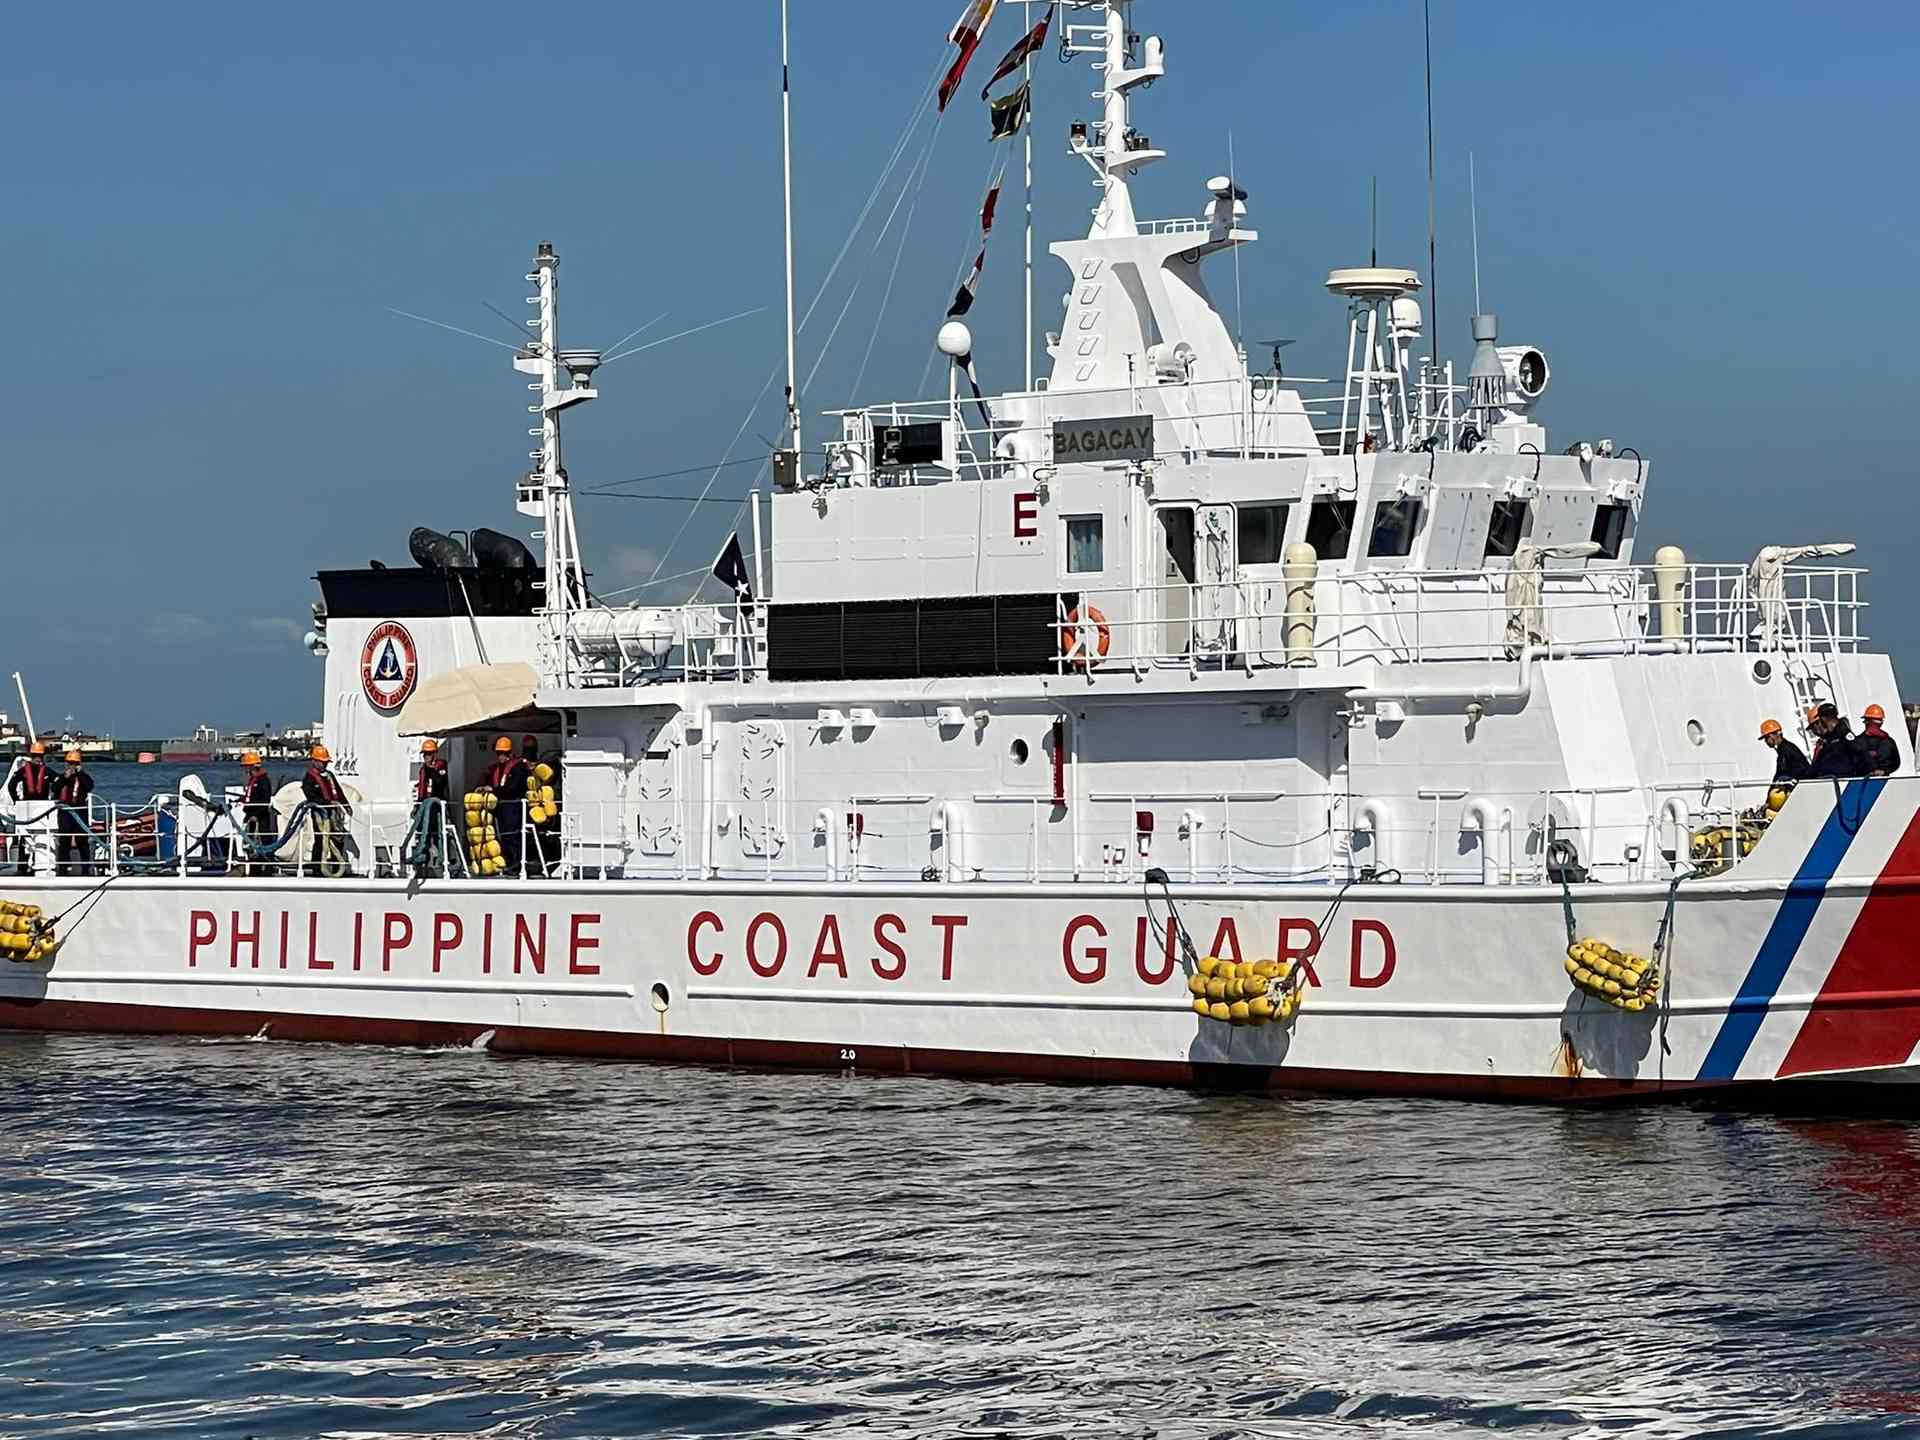 BRP Bagacay arrives at Manila; damages up to ₱2-3 million, says PCG